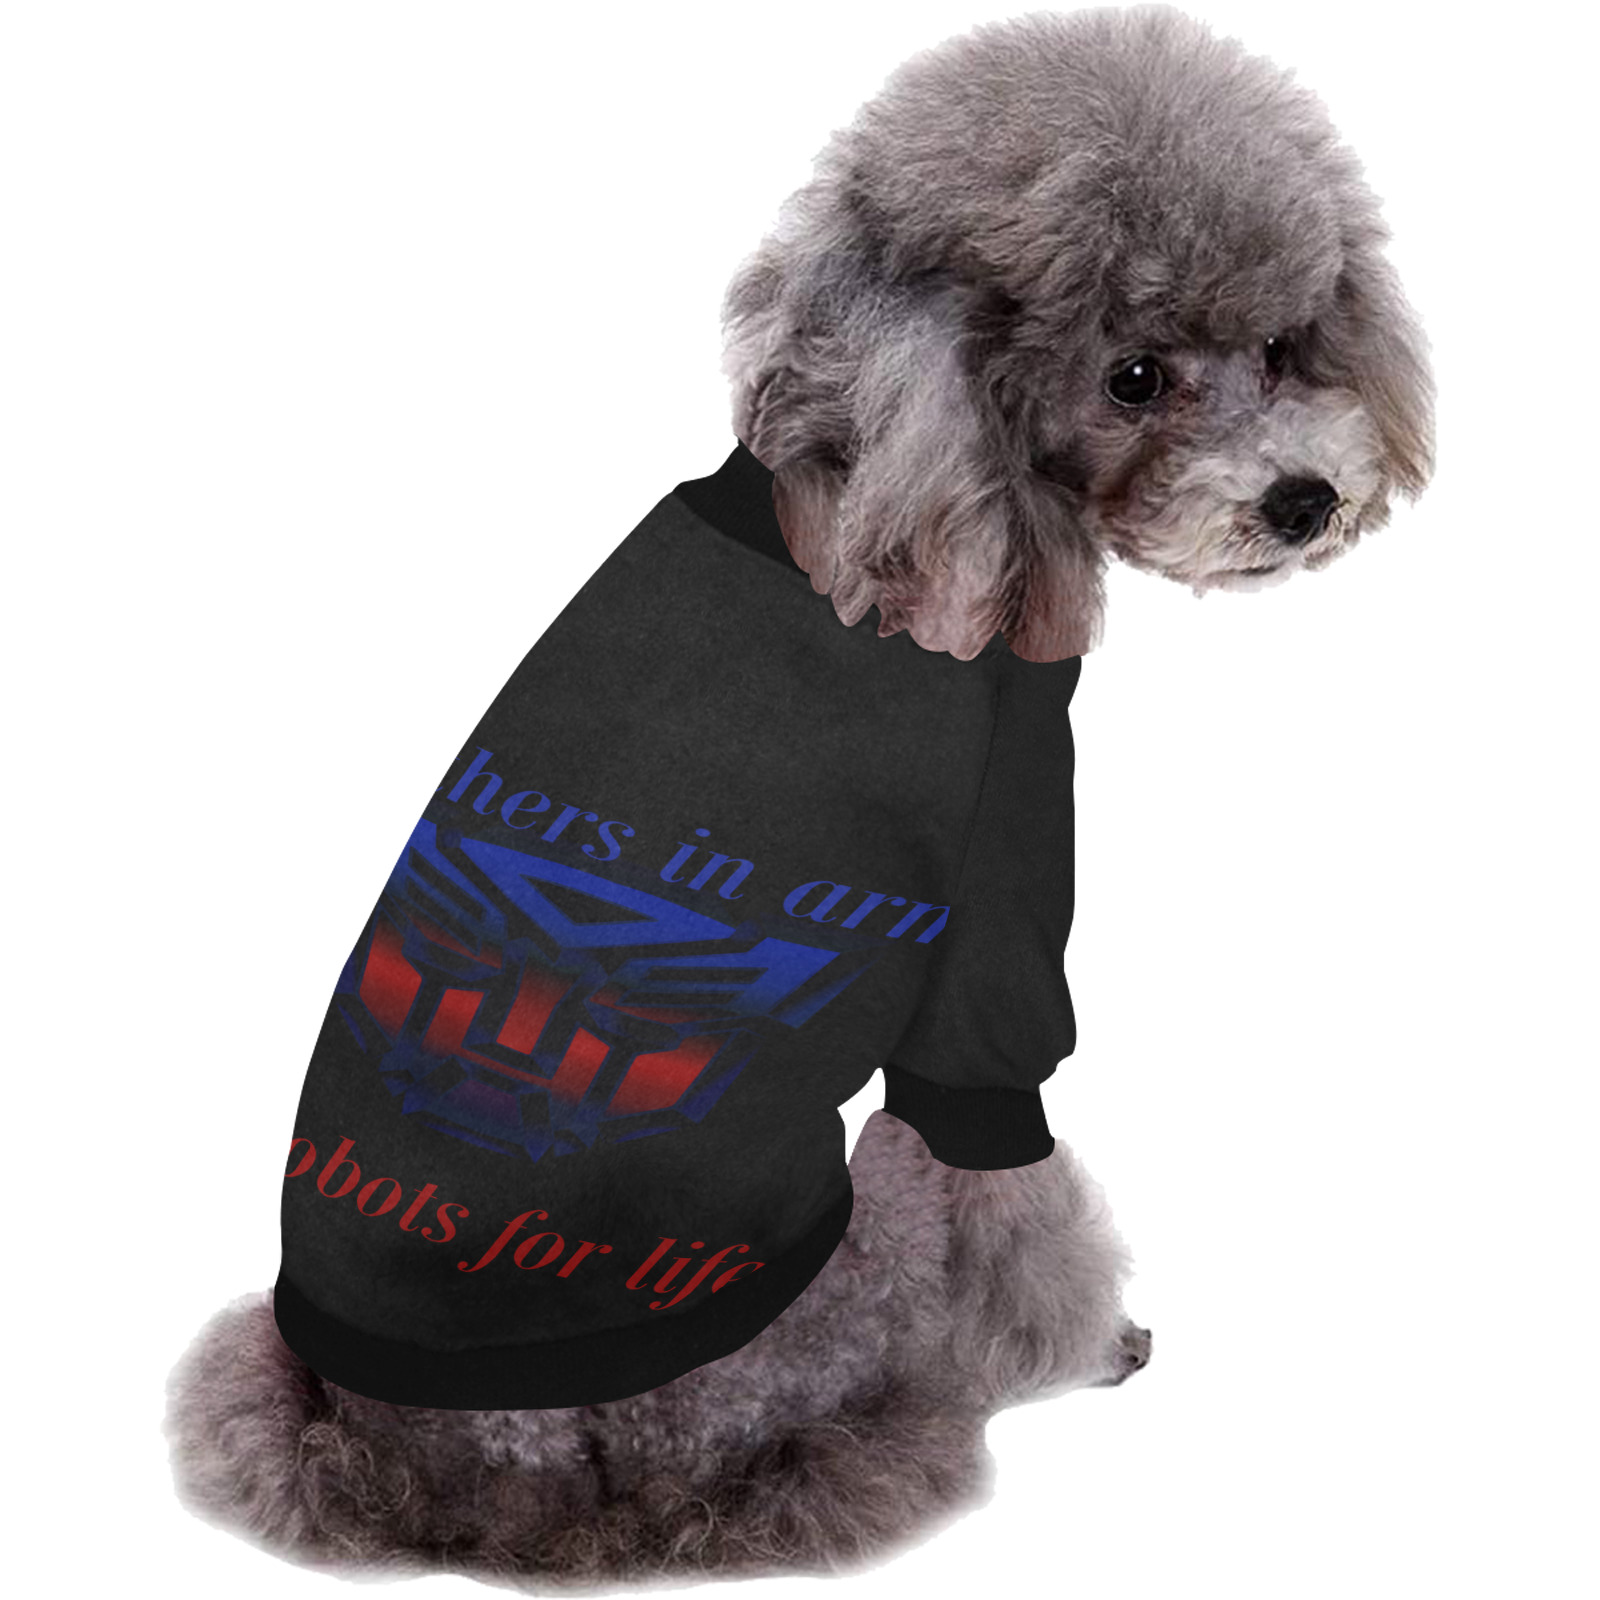 Brothers in arms Pet Dog Round Neck Shirt